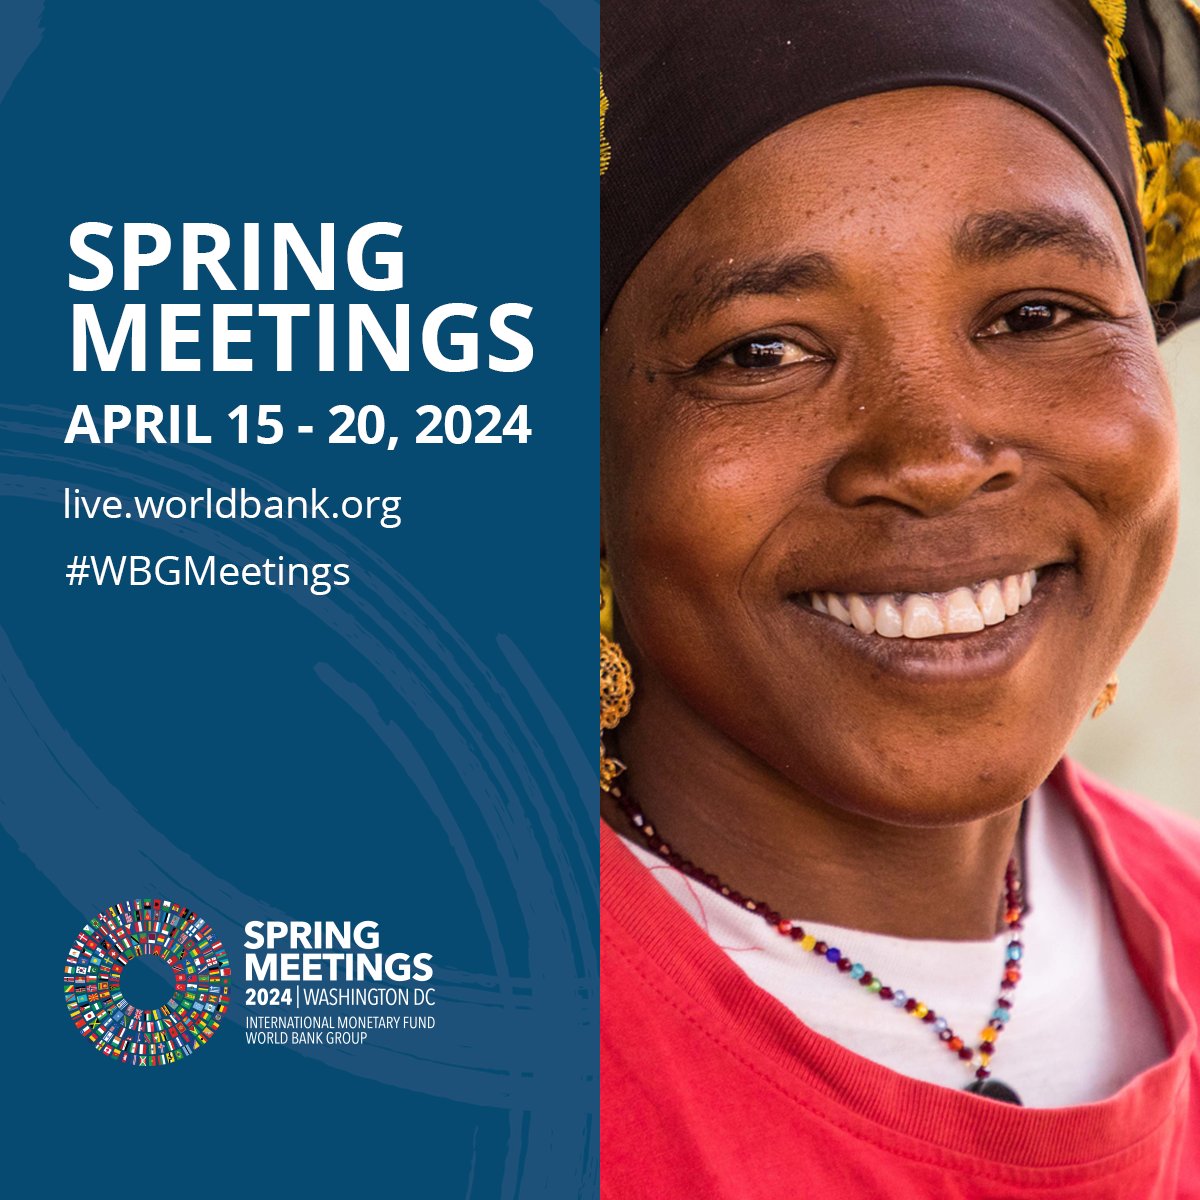 Don't miss the #WBGMeetings this April 15-20! Leaders from government, private sector, civil society, and academia converge in DC to tackle global development issues. 

Be part of the conversation and join us online: wrld.bg/Srlx50RaqMg #GlobalDev